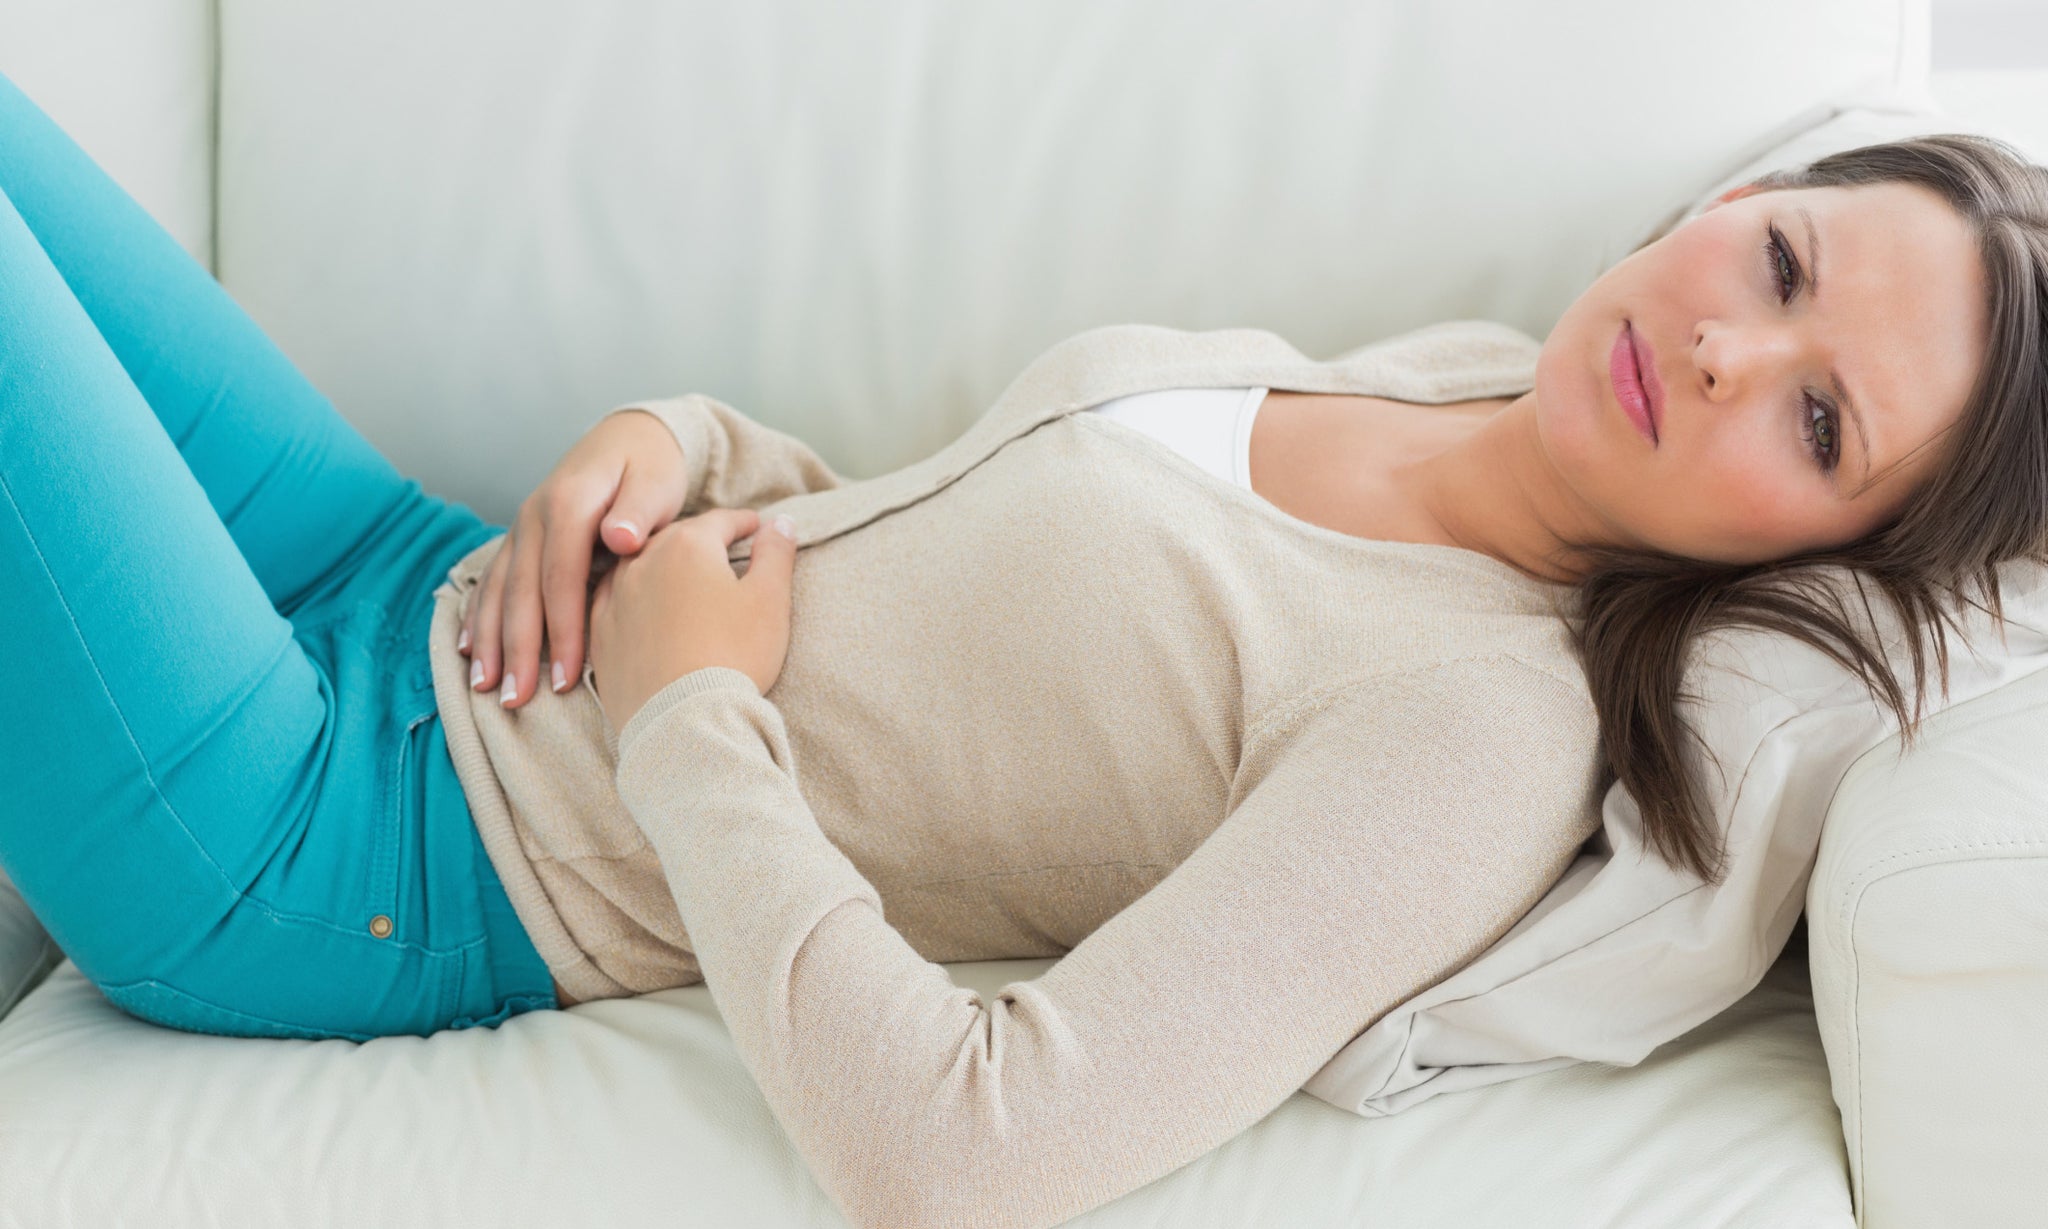 Have You Been Diagnosed with IBS?